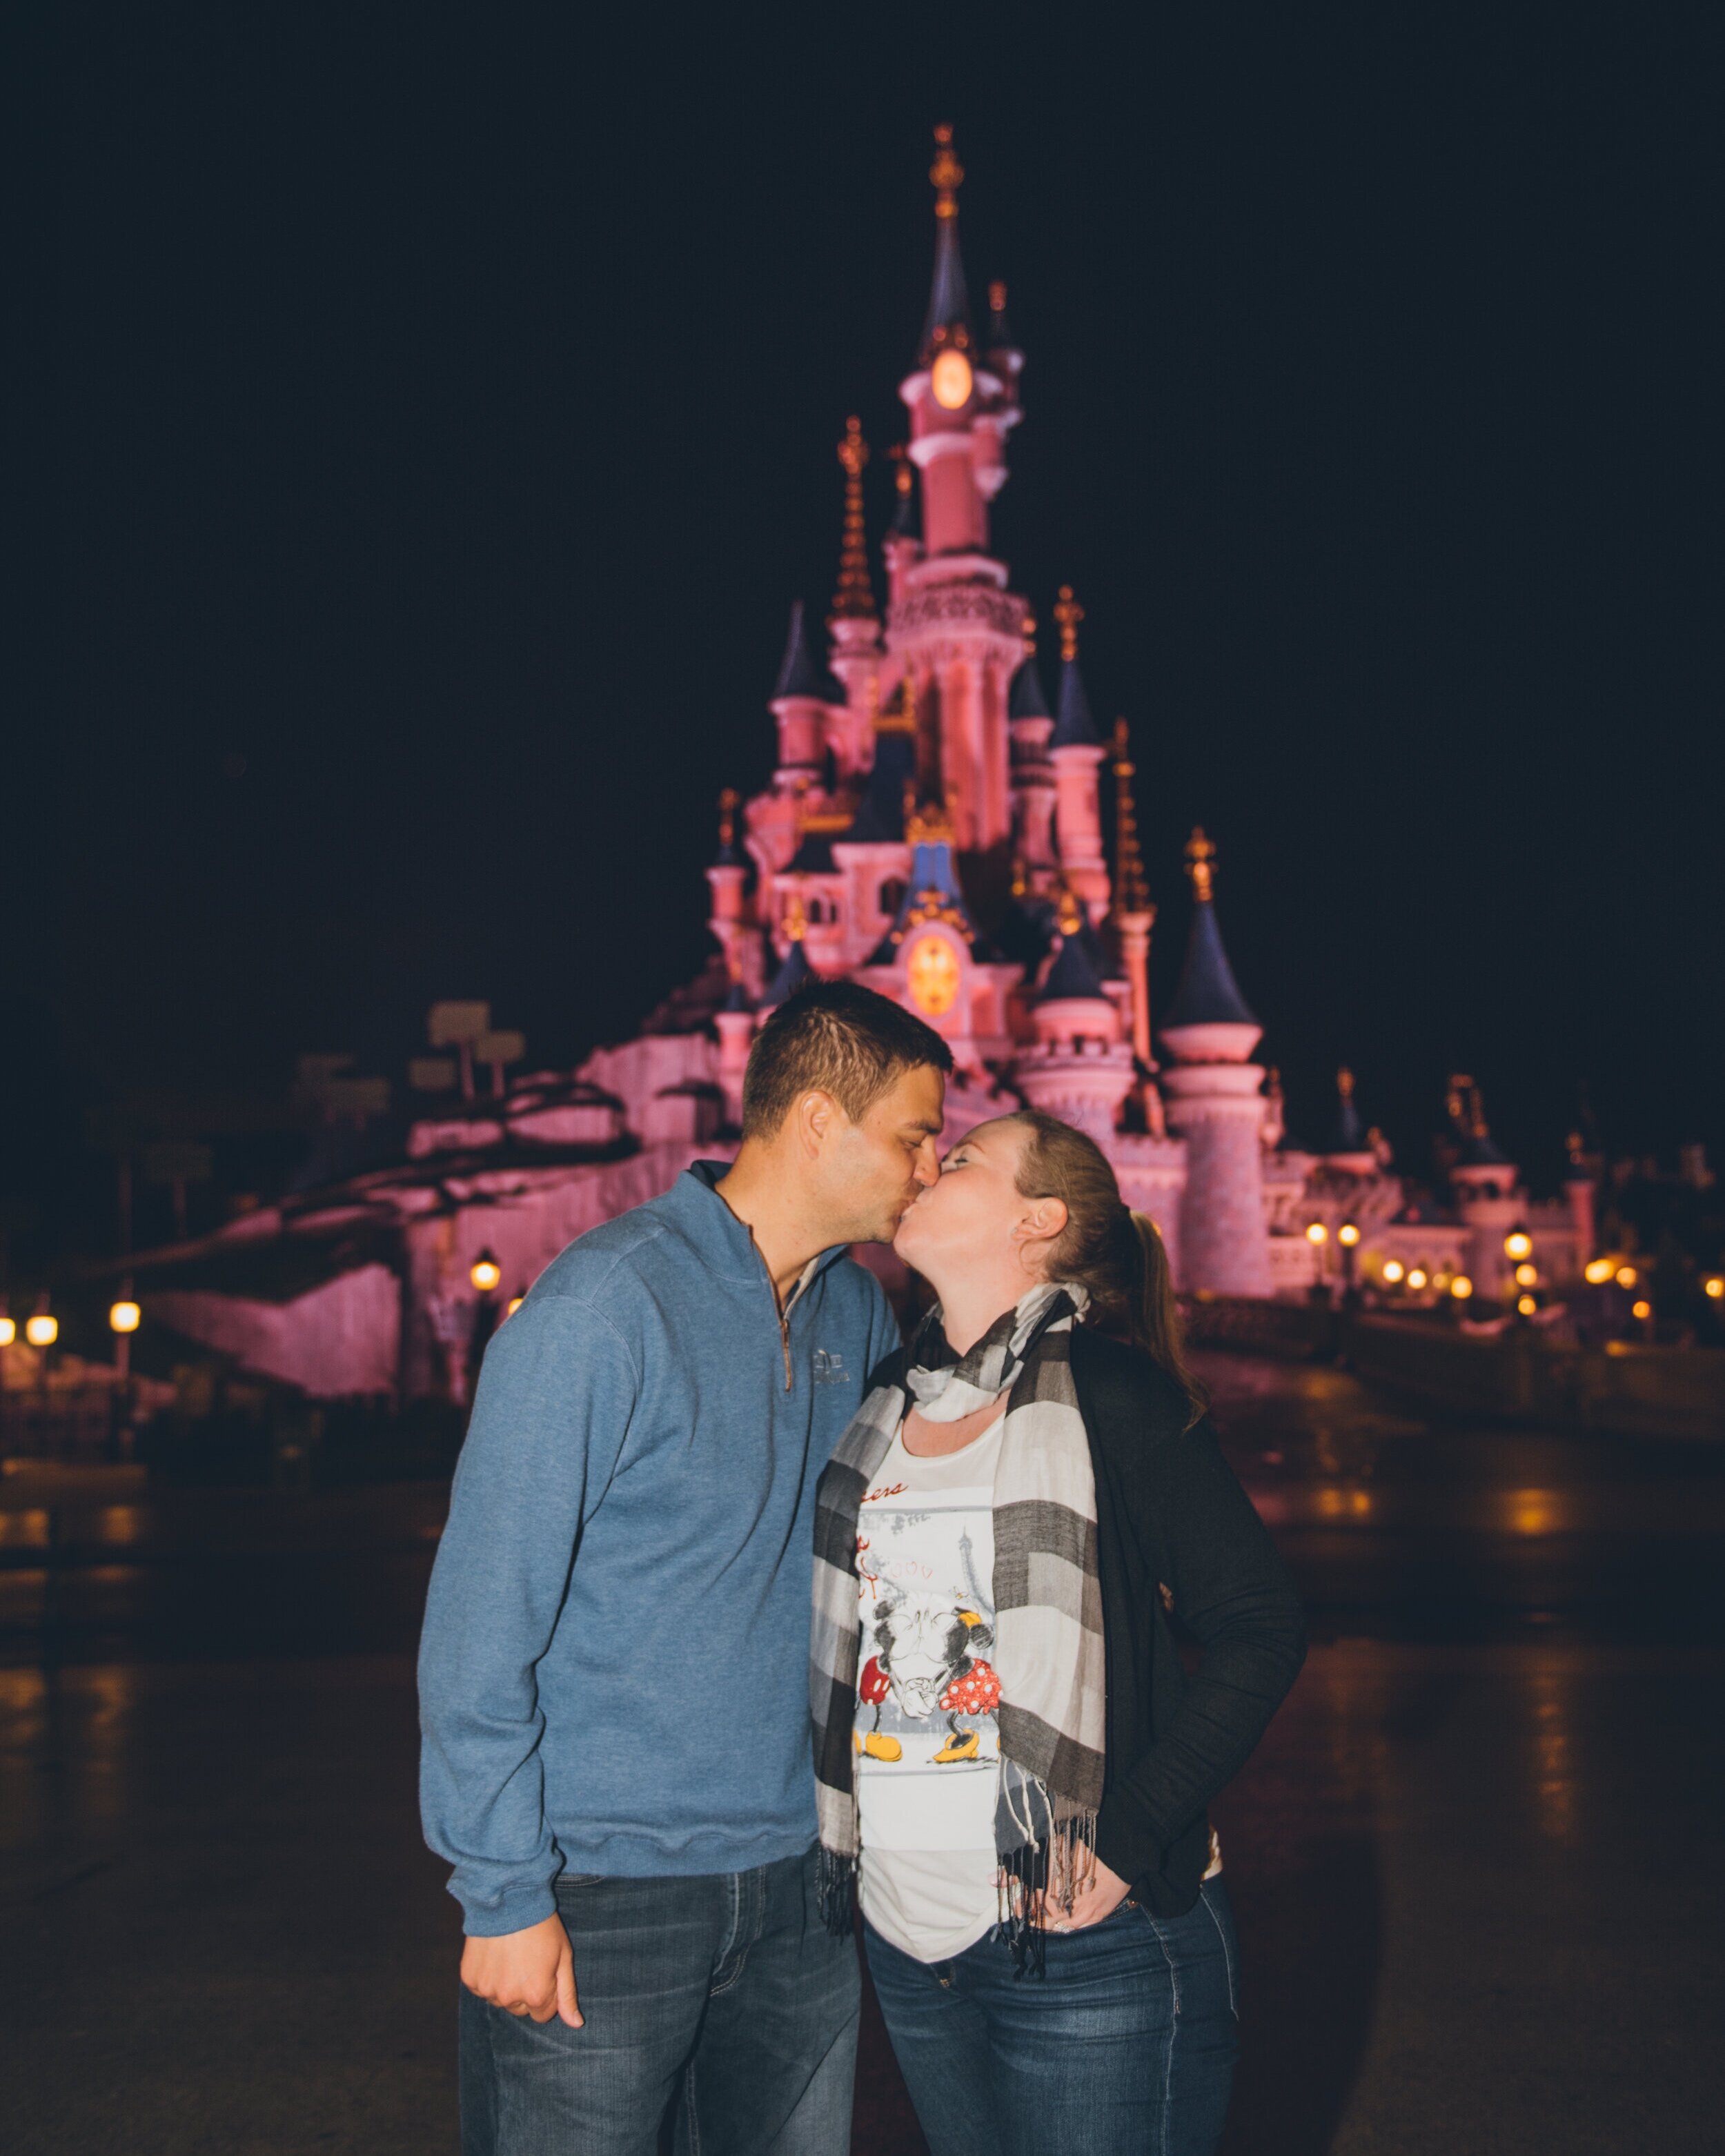 Why Disneyland Paris Photopass is NOT Worth it (and What We Did Instead)